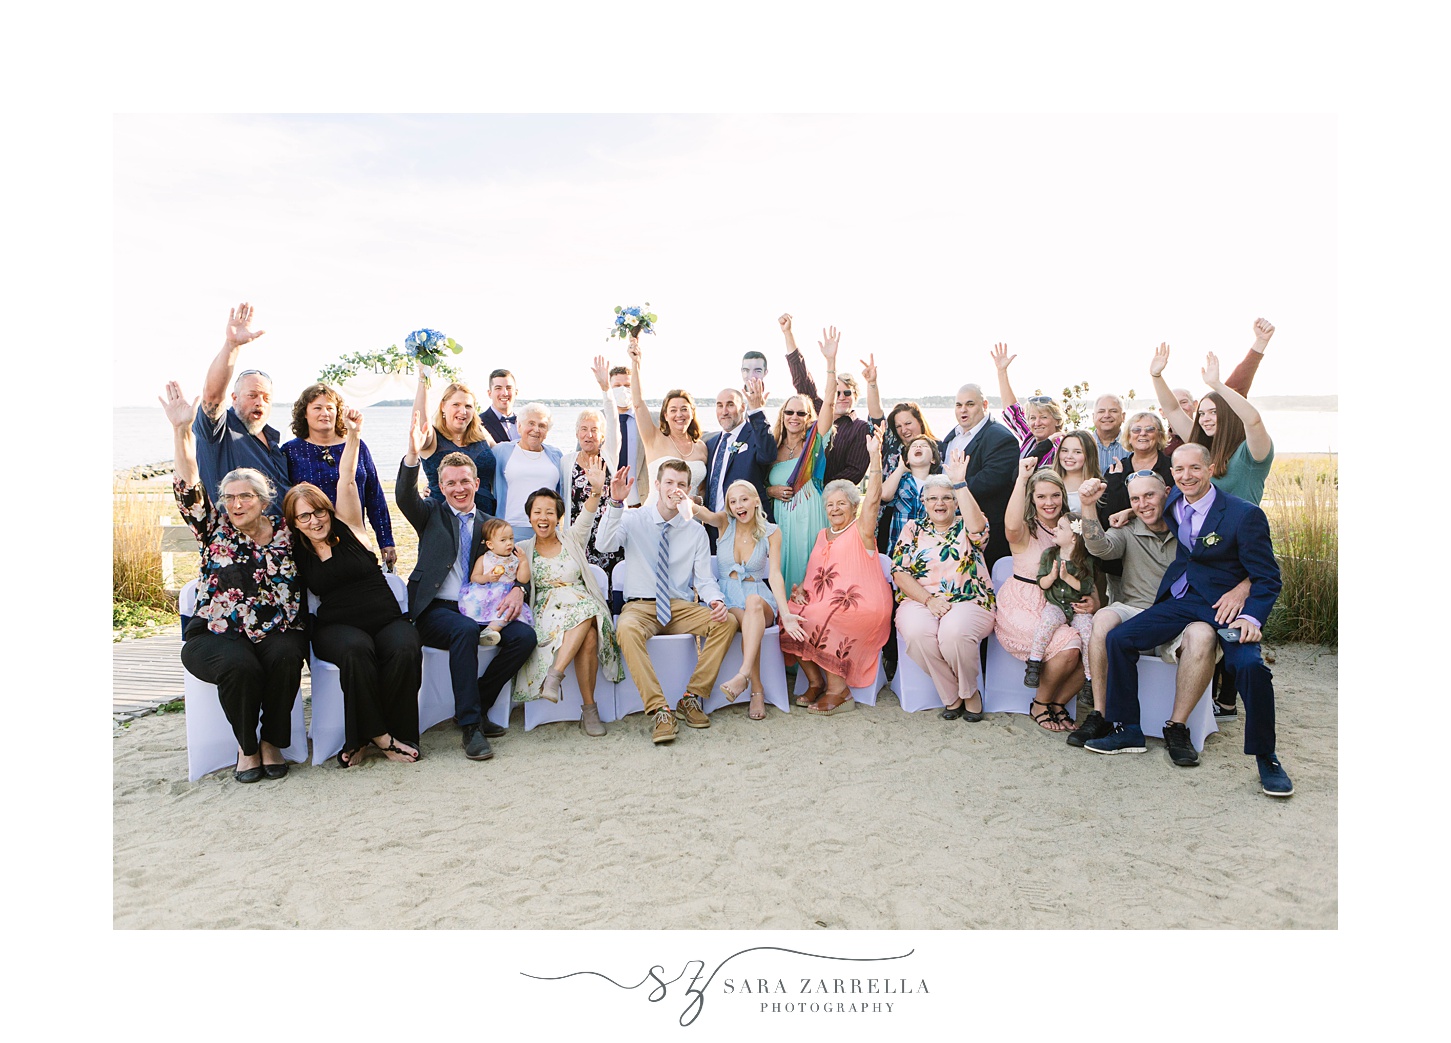 wedding guests cheer for bride and groom on beach